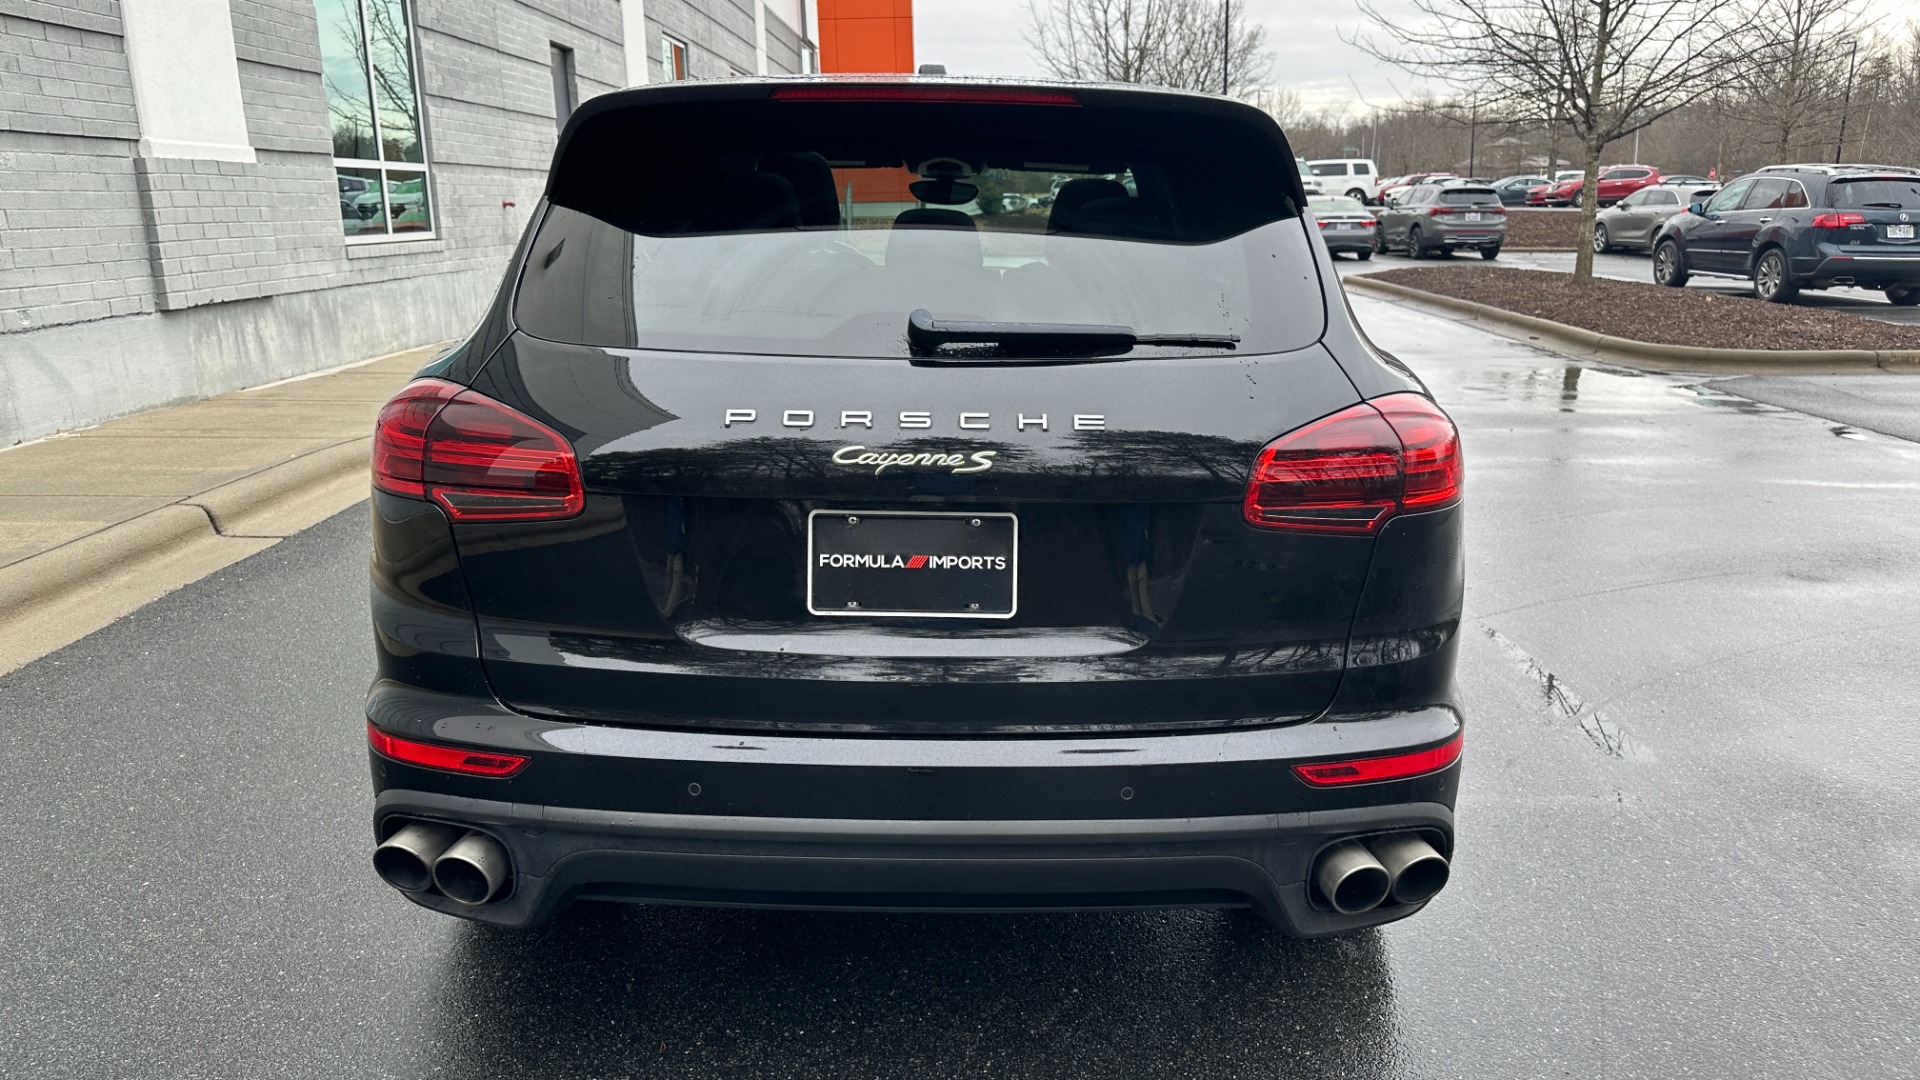 Used 2017 Porsche Cayenne S E-Hybrid PLATINUM / PREMIUM PLUS / SAFETY ASSIST for sale Sold at Formula Imports in Charlotte NC 28227 8